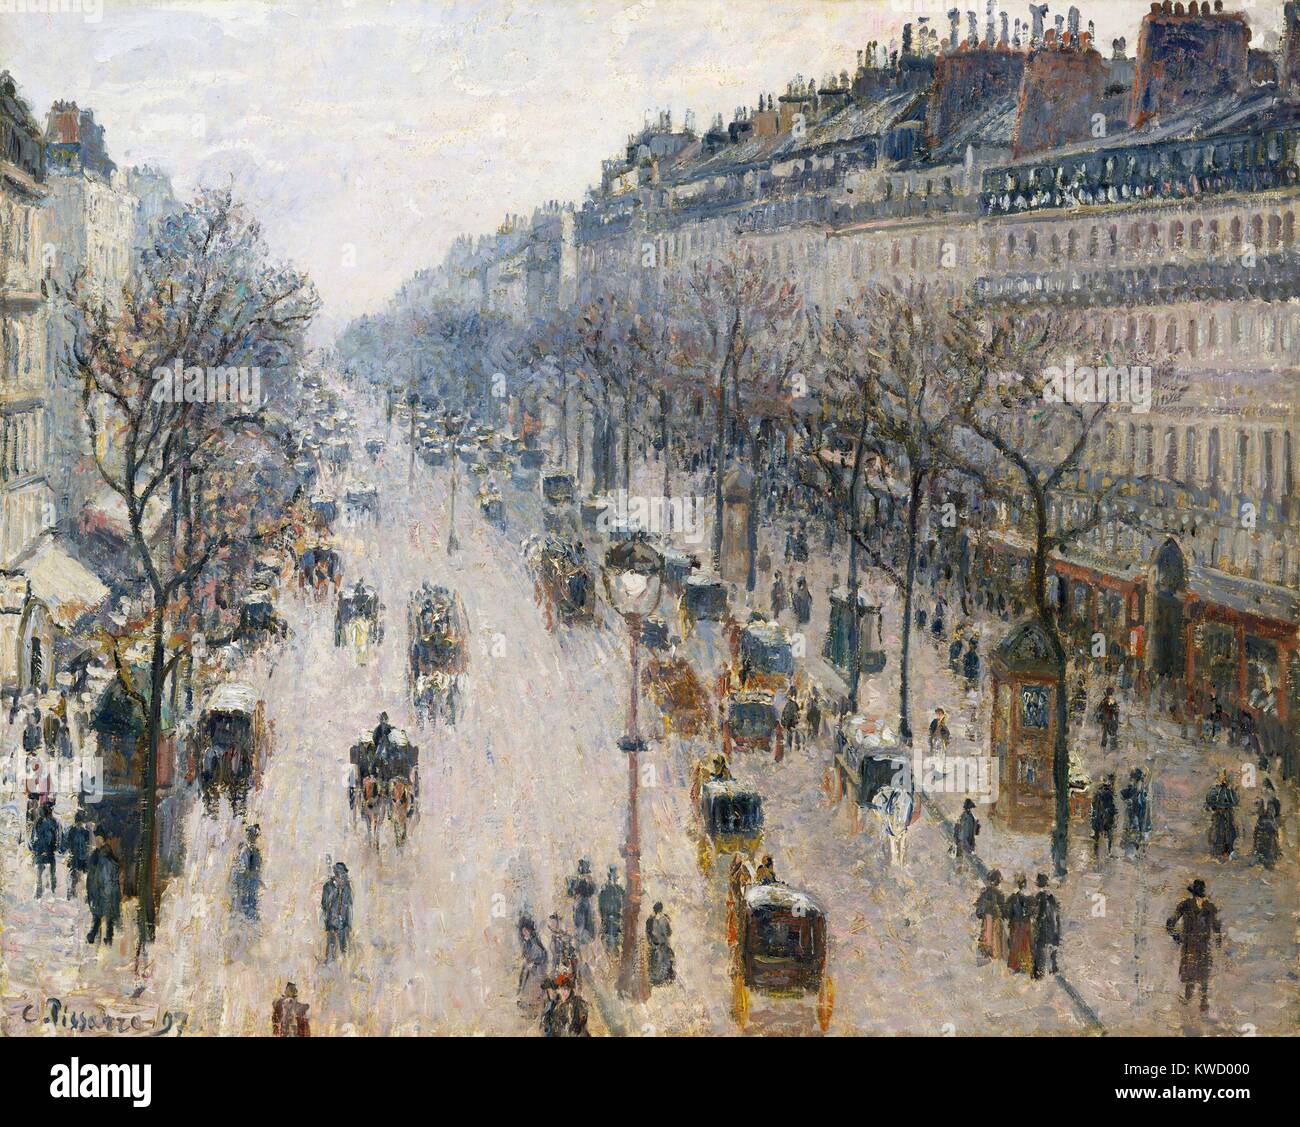 Boulevard Montmartre on Winter Morning, by Camille Pissarro, 1897, French impressionist oil painting. This view of Paris was painted from his rooms at the Grand Hotel de Russie (BSLOC 2017 3 63) Stock Photo